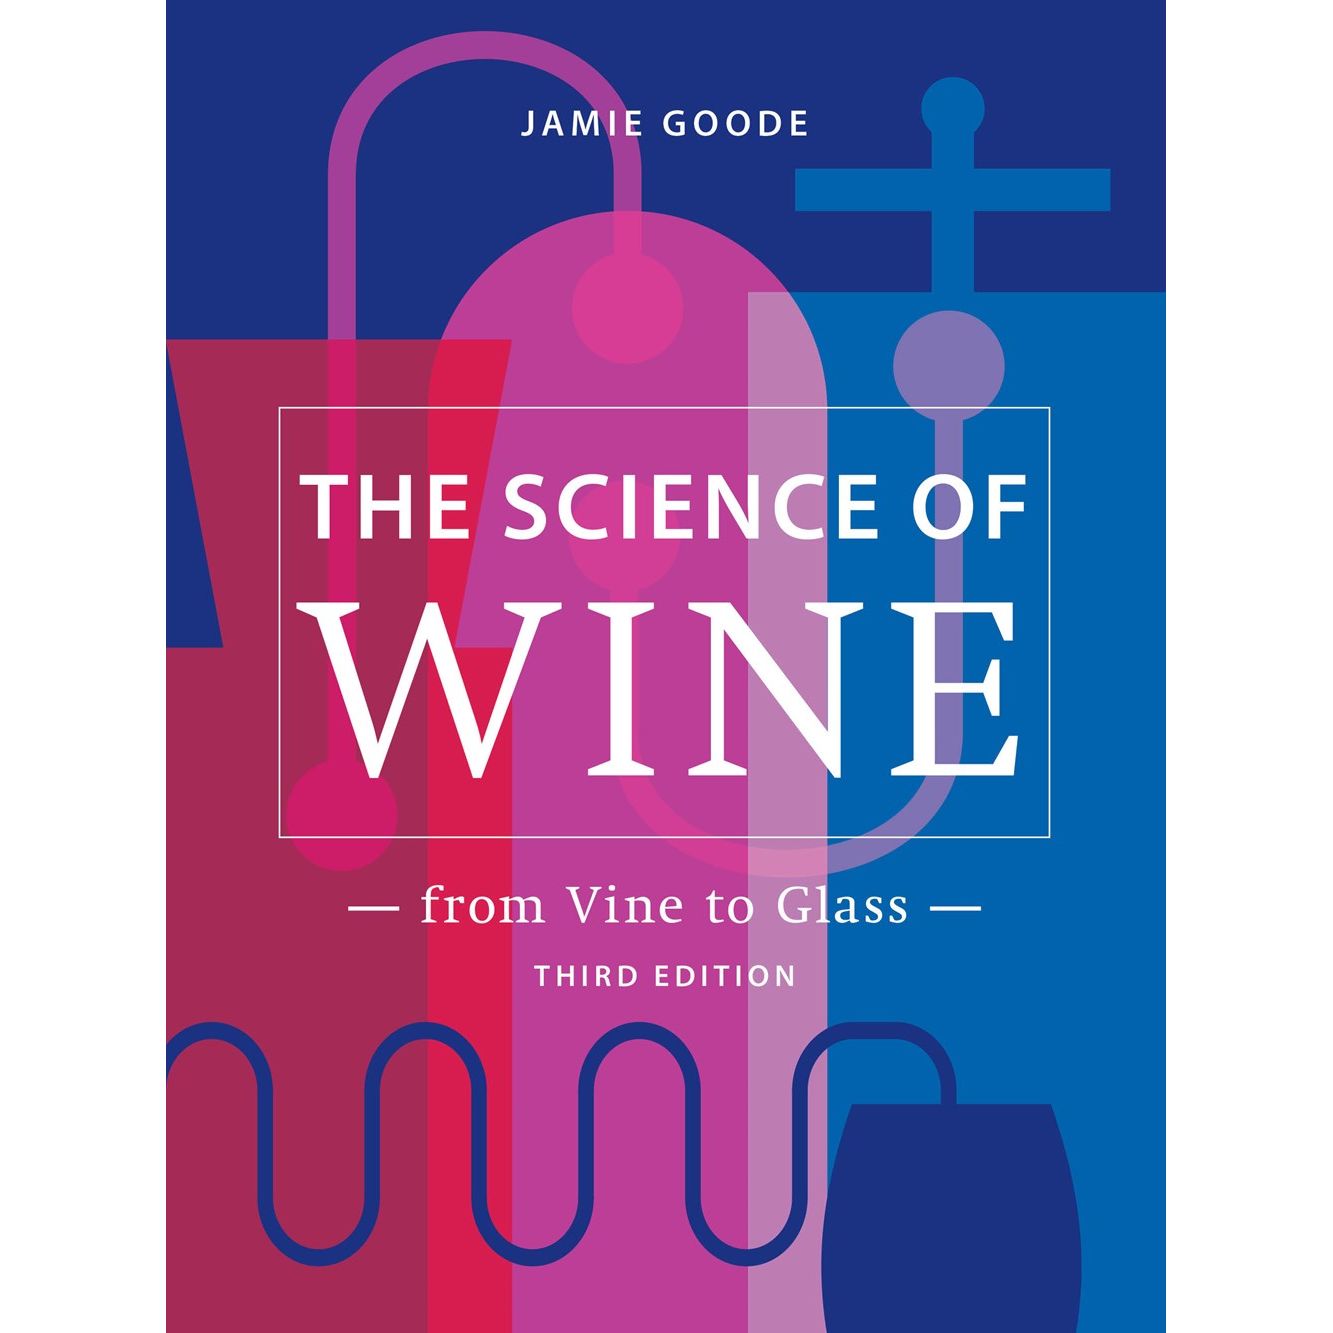 The Science of Wine: 3rd Edition (Jamie Goode)